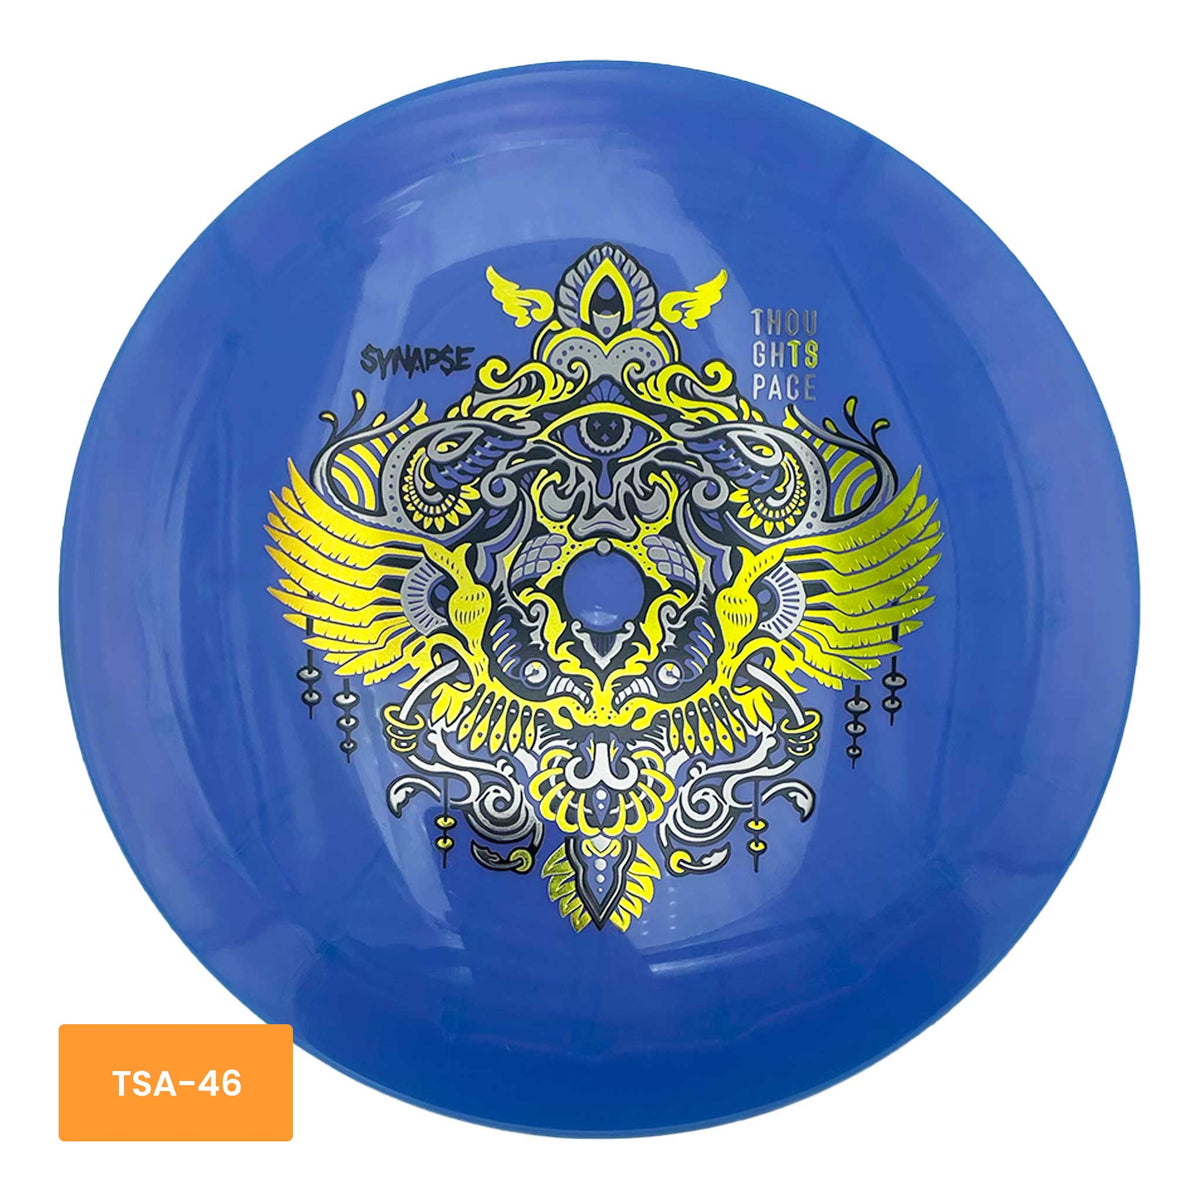 Thought Space Athletics Ethereal Synapse driver - Blue / Gold